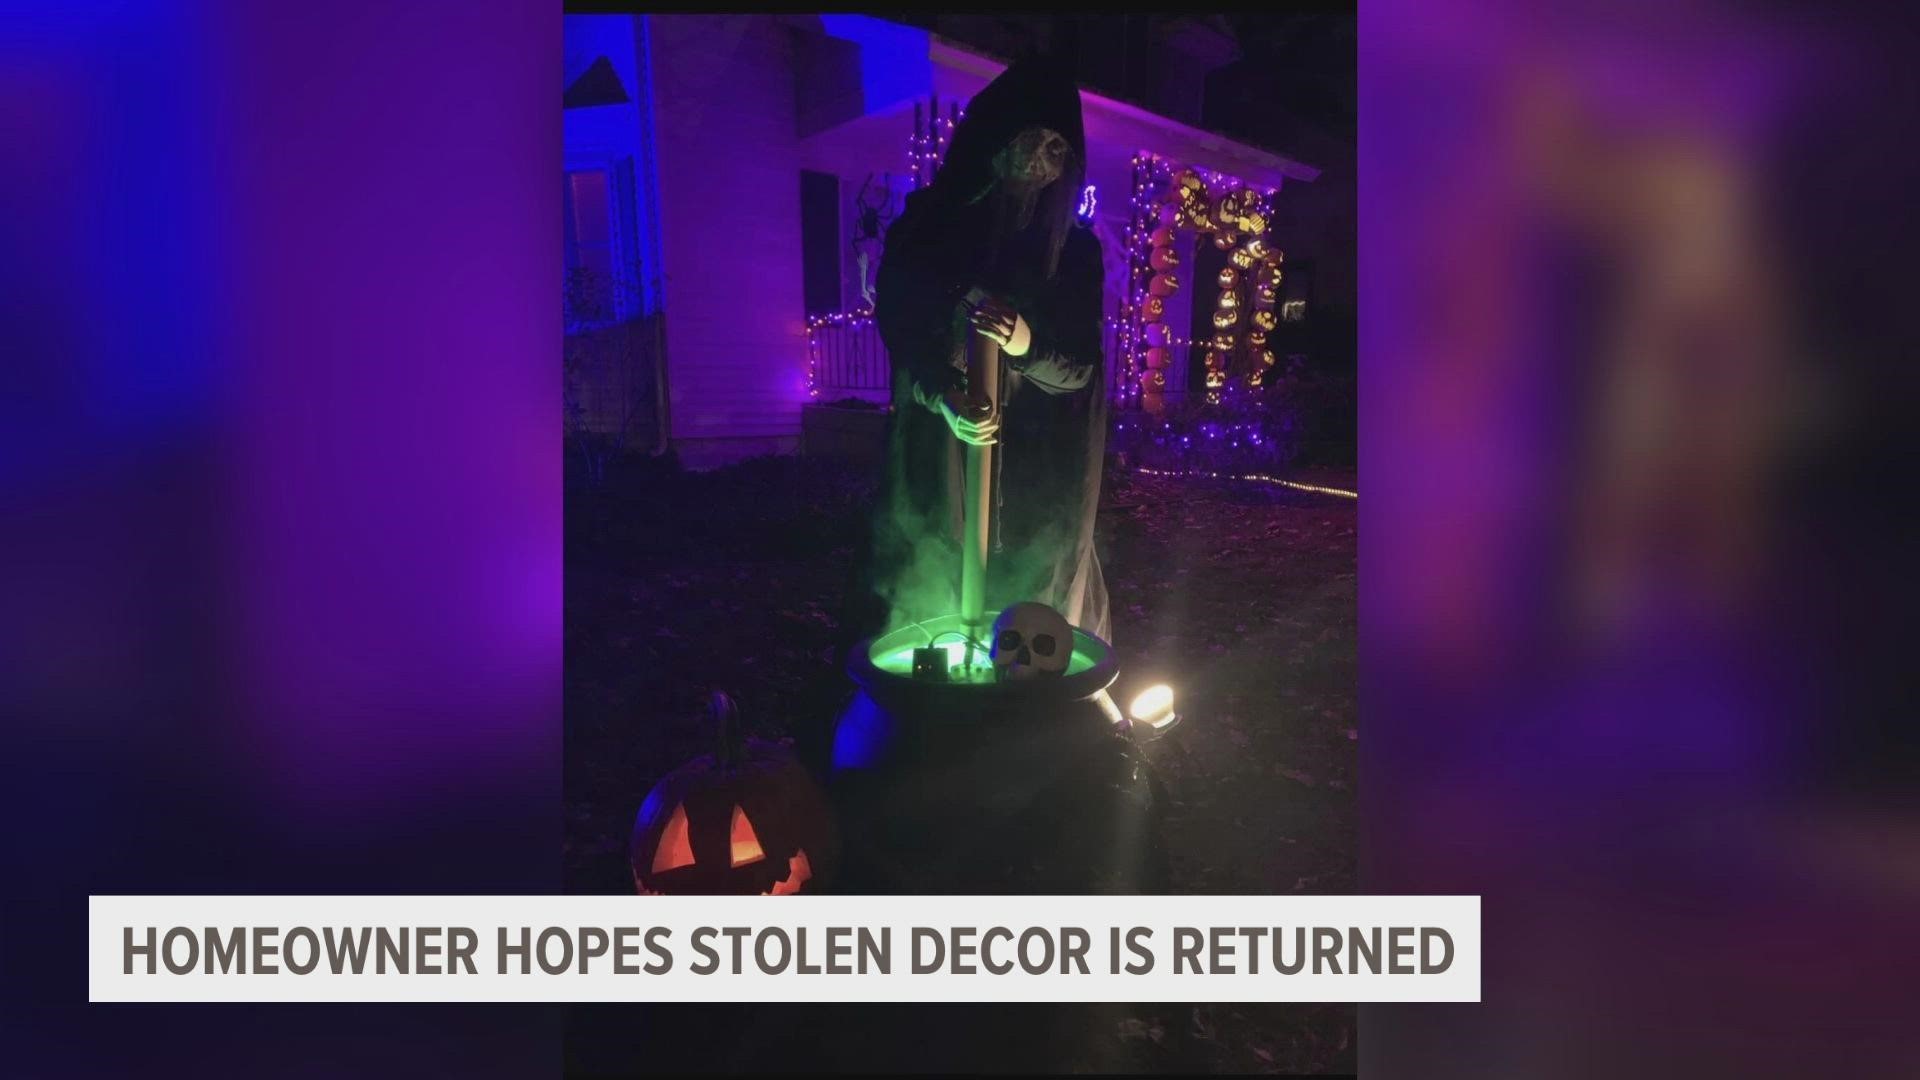 Helga the Witch is about 5 feet tall. She took hours for homeowner, Nick Wallace, to make for trick-or-treaters to enjoy.